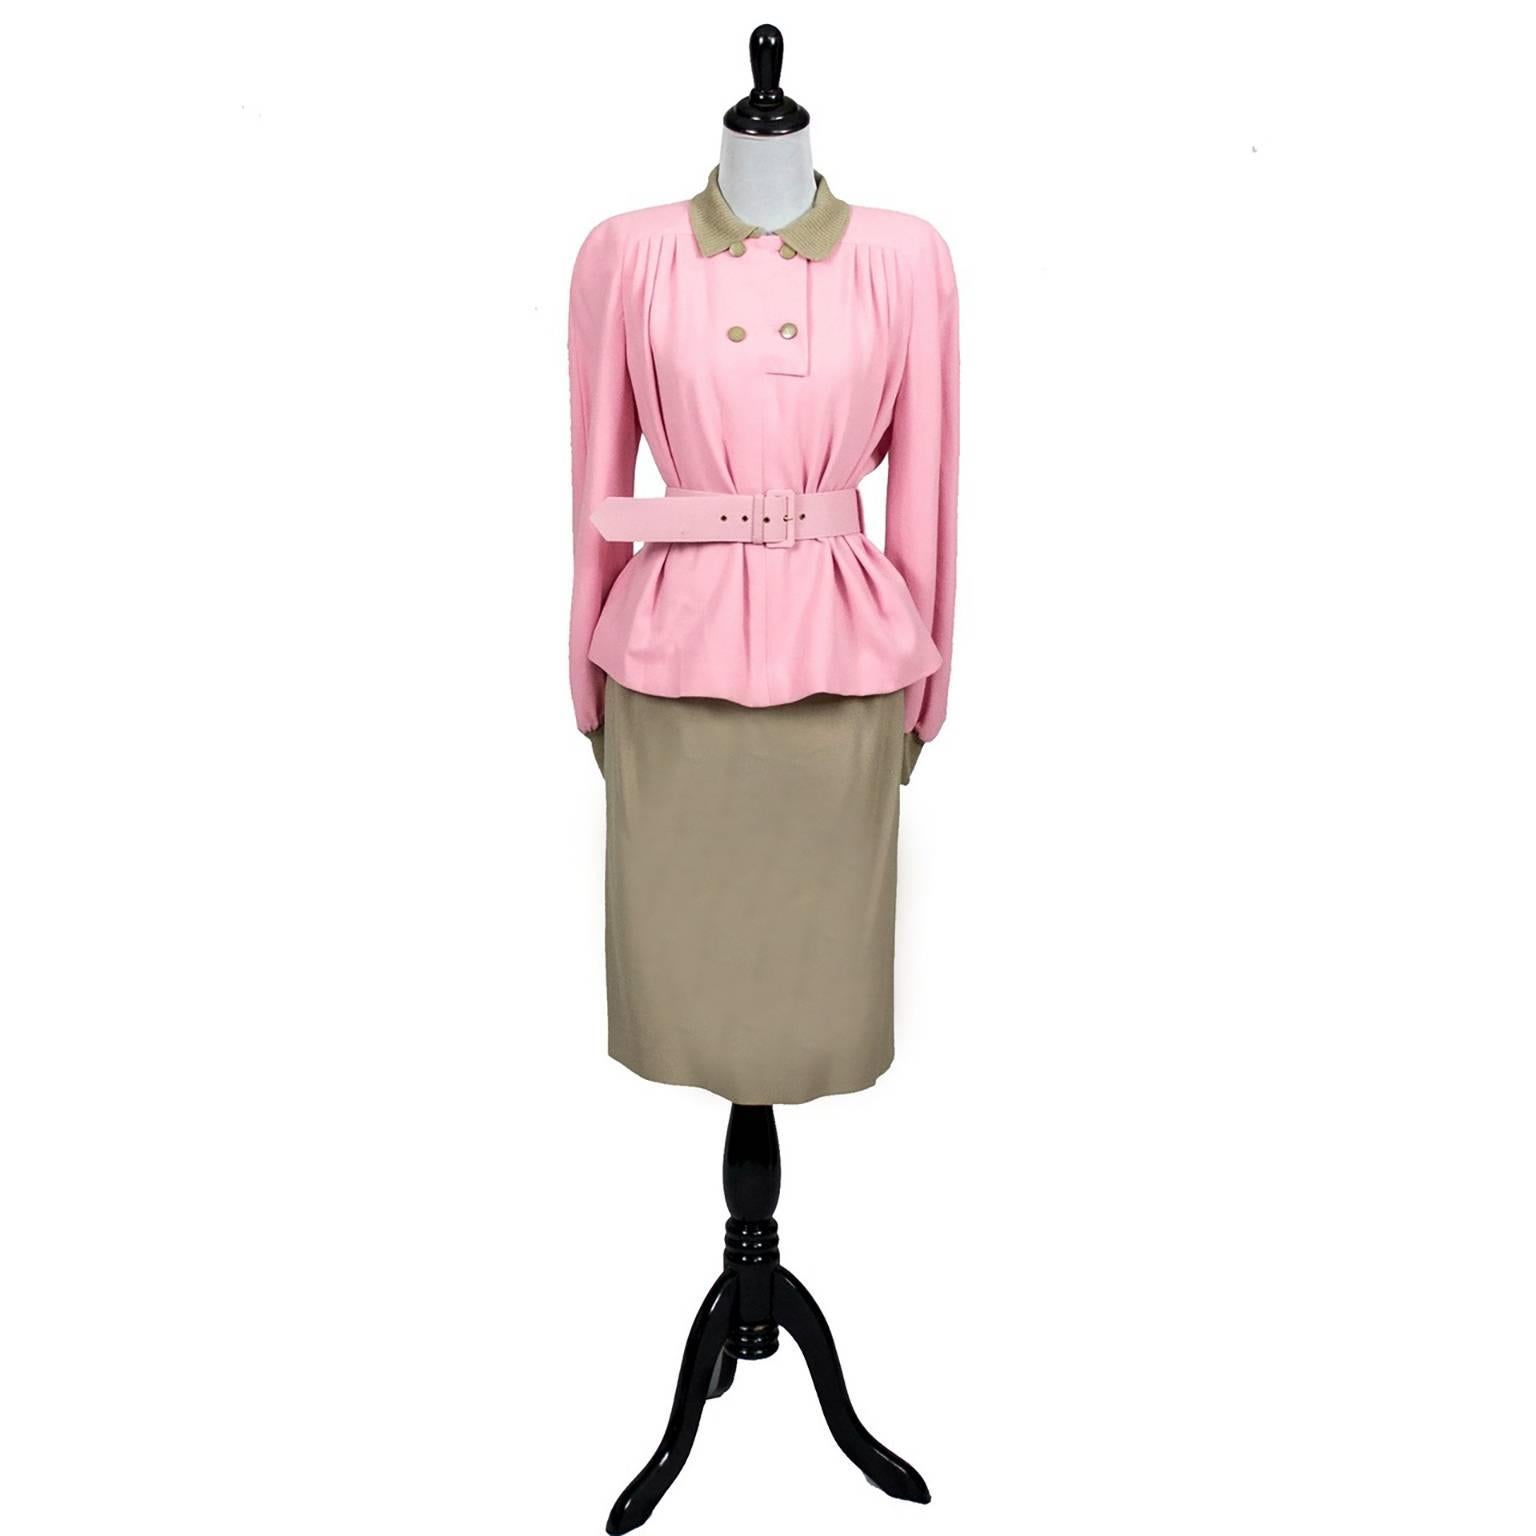 1984 Runway Vintage Valentino Boutique 2pc Skirt Top Outfit Pink & Camel Size 8 2